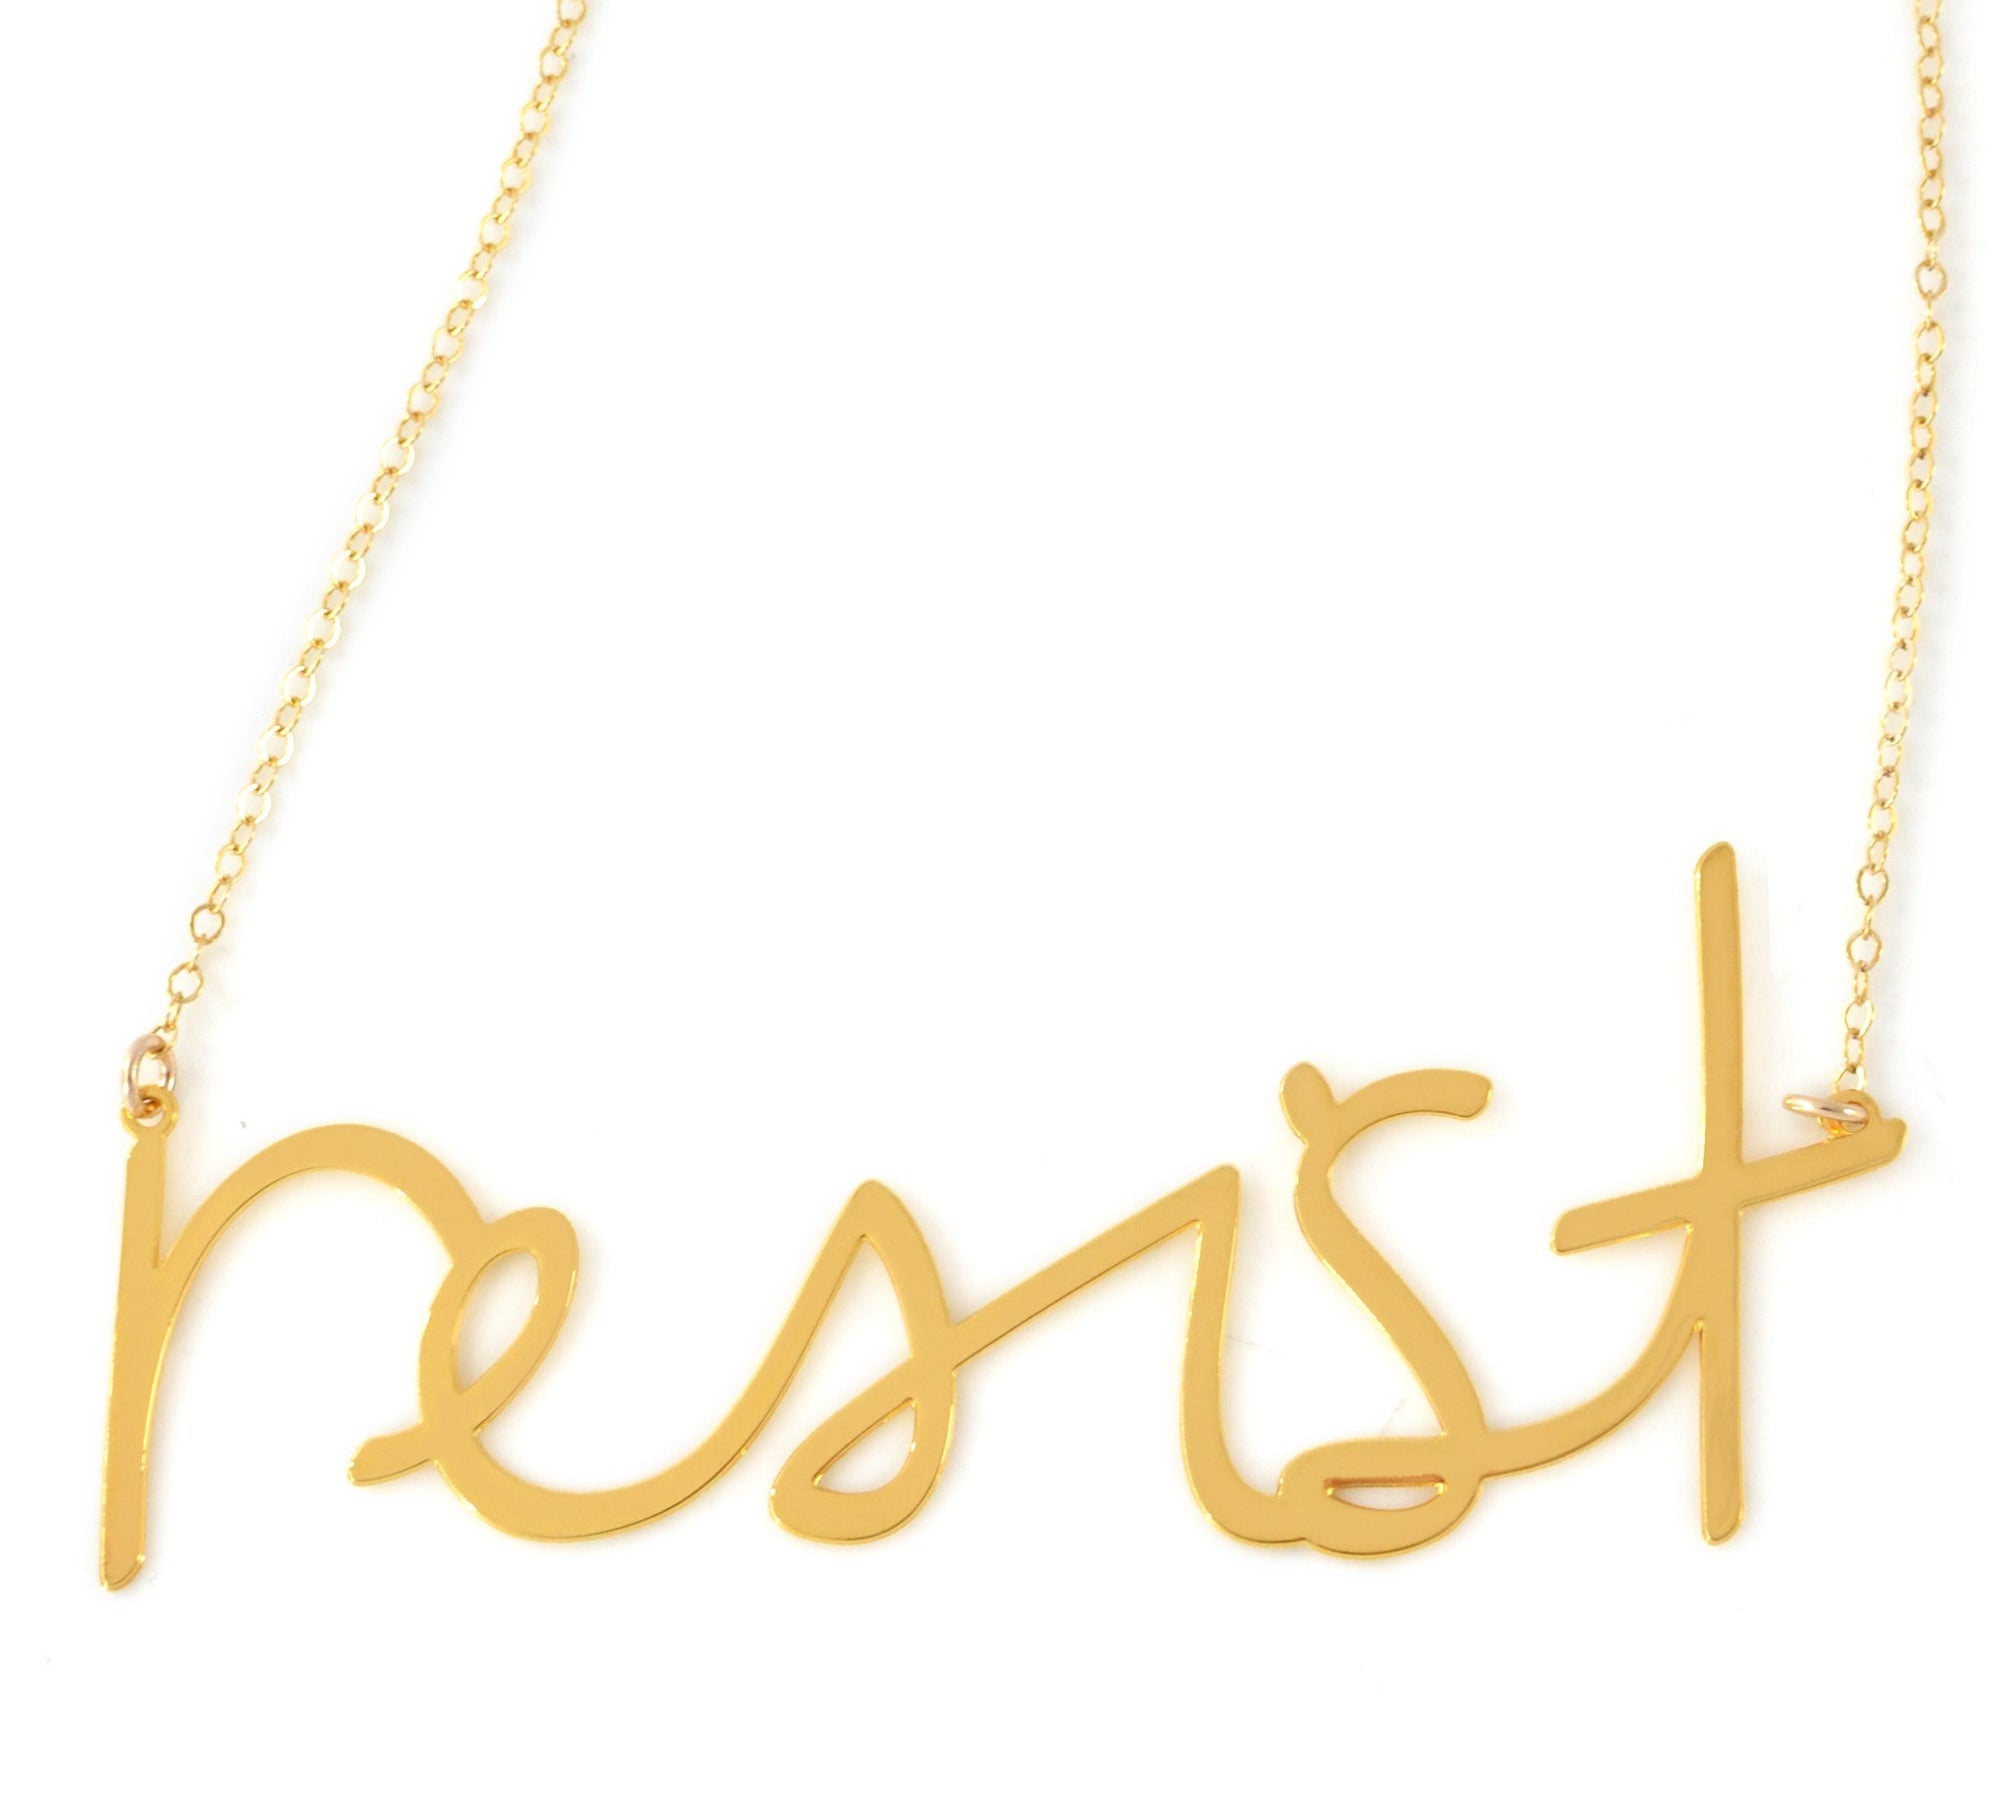 Resist Necklace - High Quality, Affordable, Hand Written, Empowering, Self Love, Mantra Word Necklace - Available in Gold and Silver - Small and Large Sizes - Made in USA - Brevity Jewelry